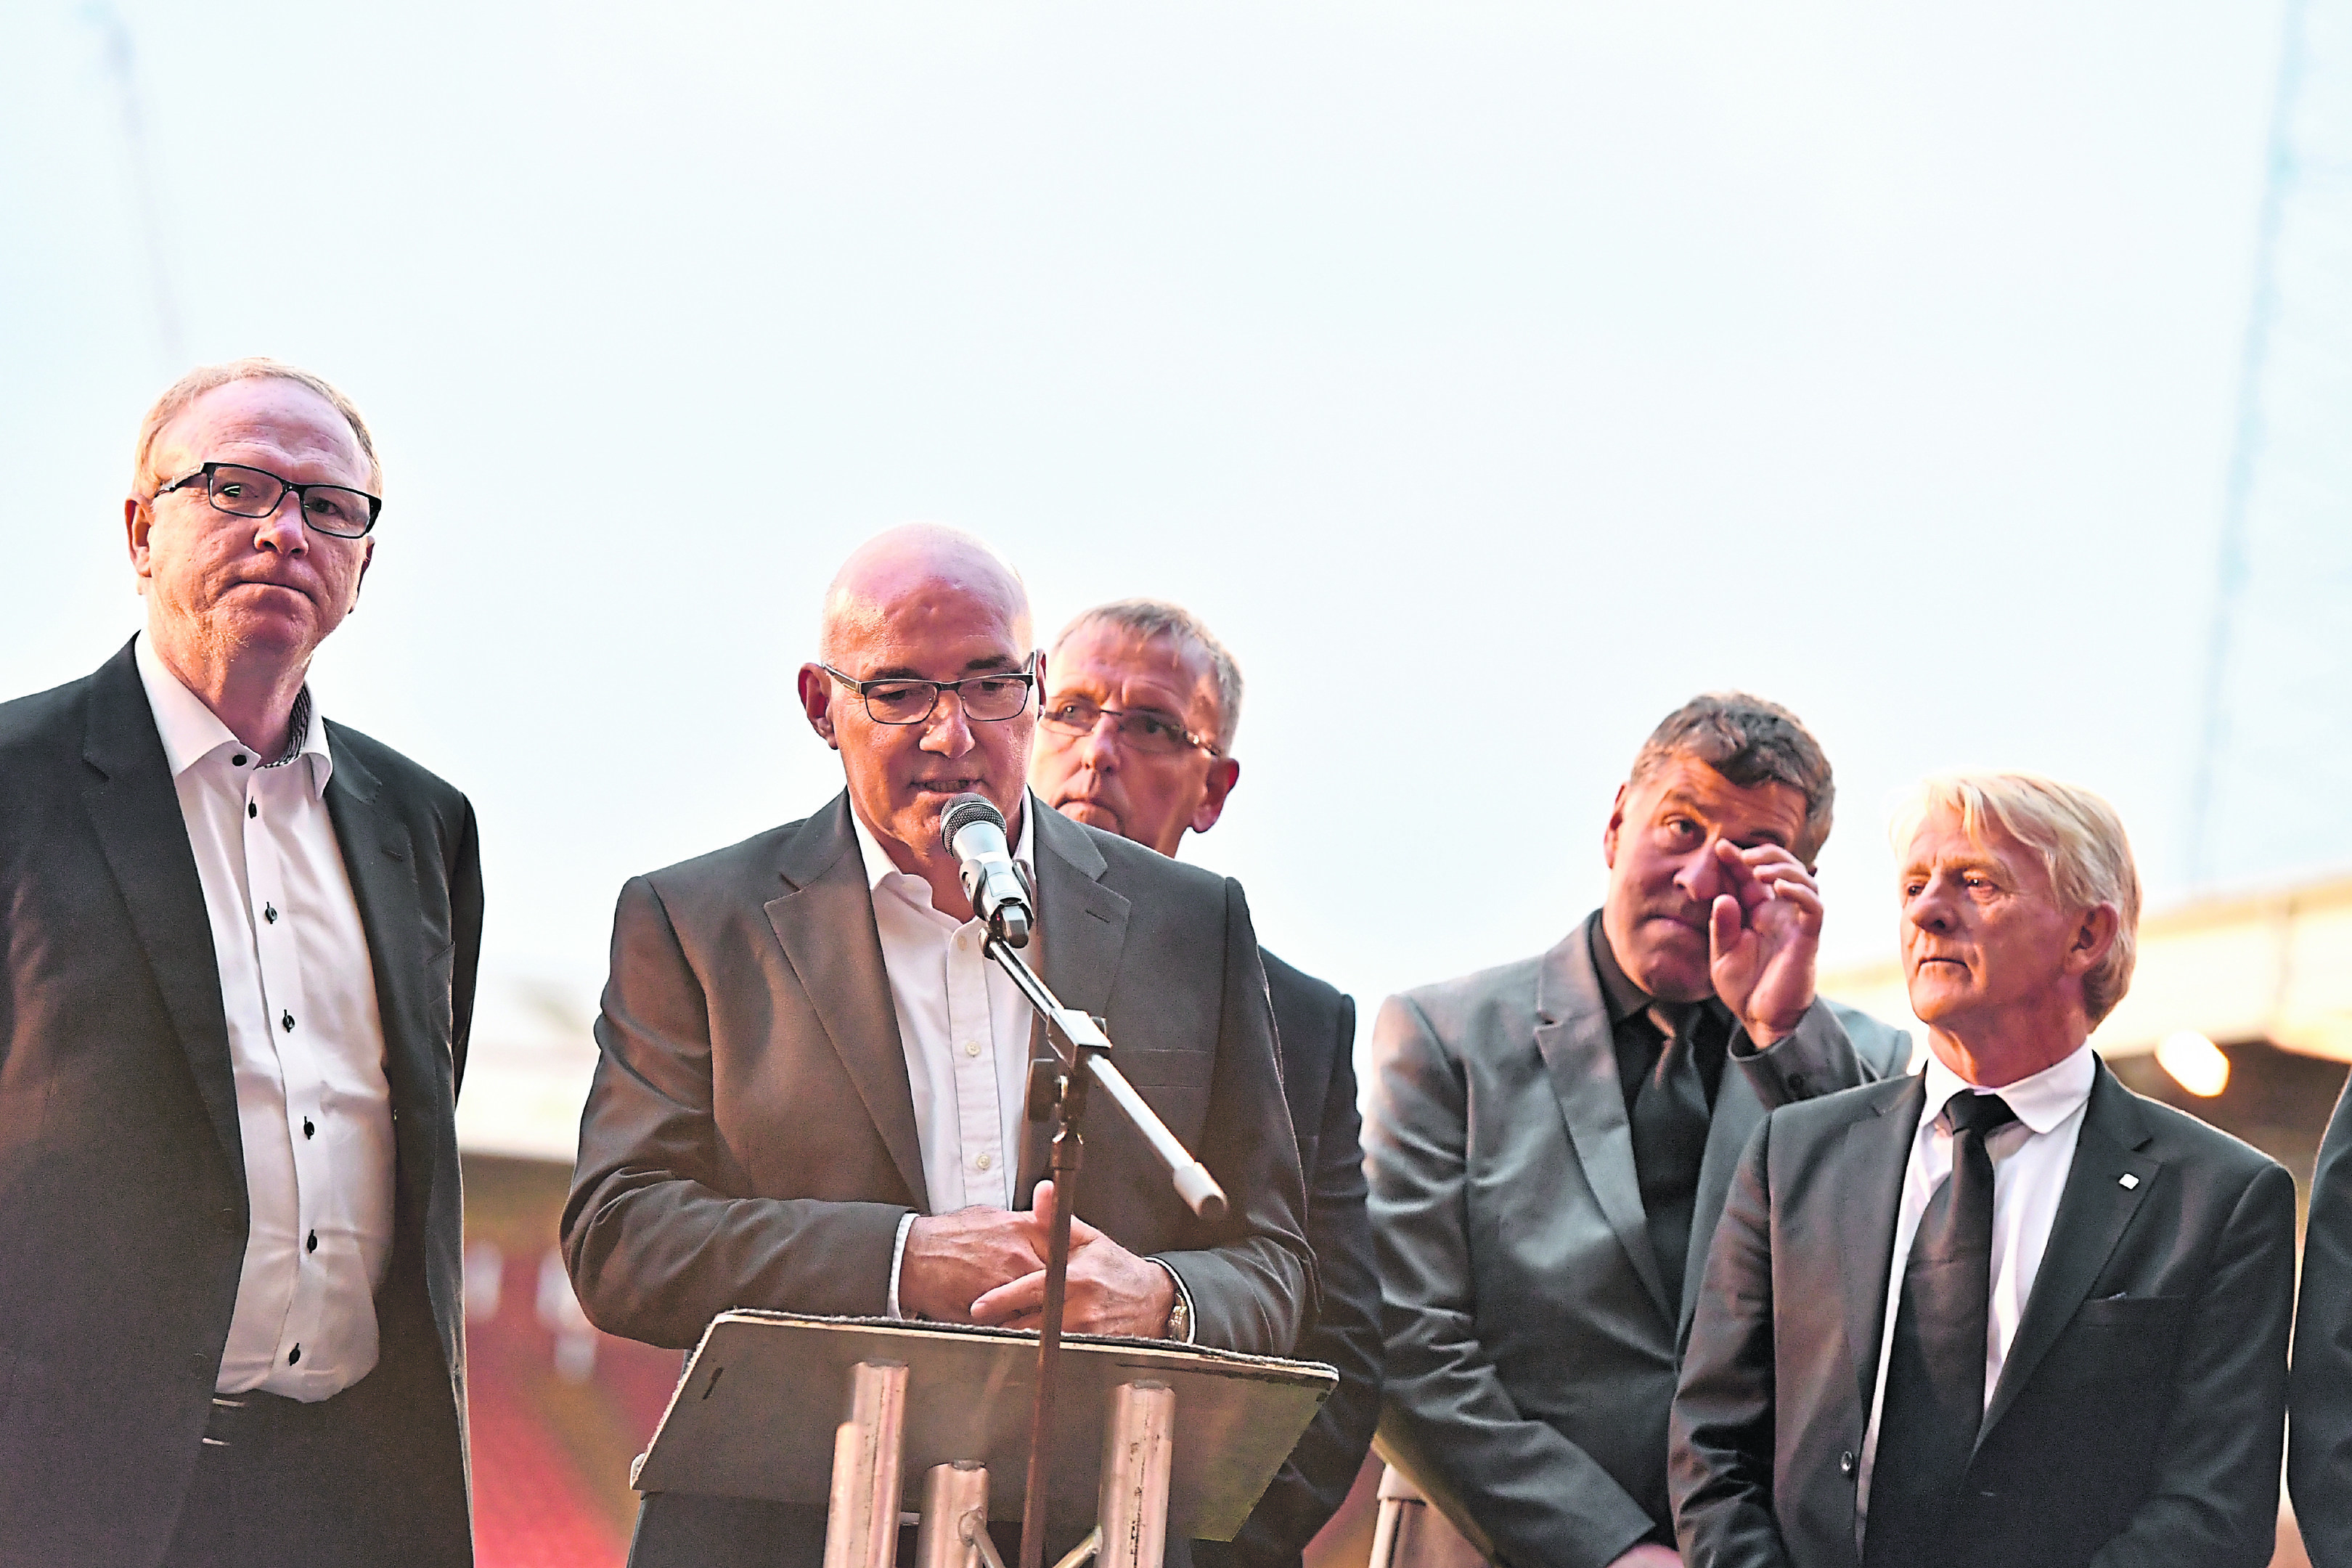 Neale Cooper's former teammates including Willie Miller, Alex McLeish, Mark McGhee and Gordon Strachan were among thousands who gathered to pay tribute.